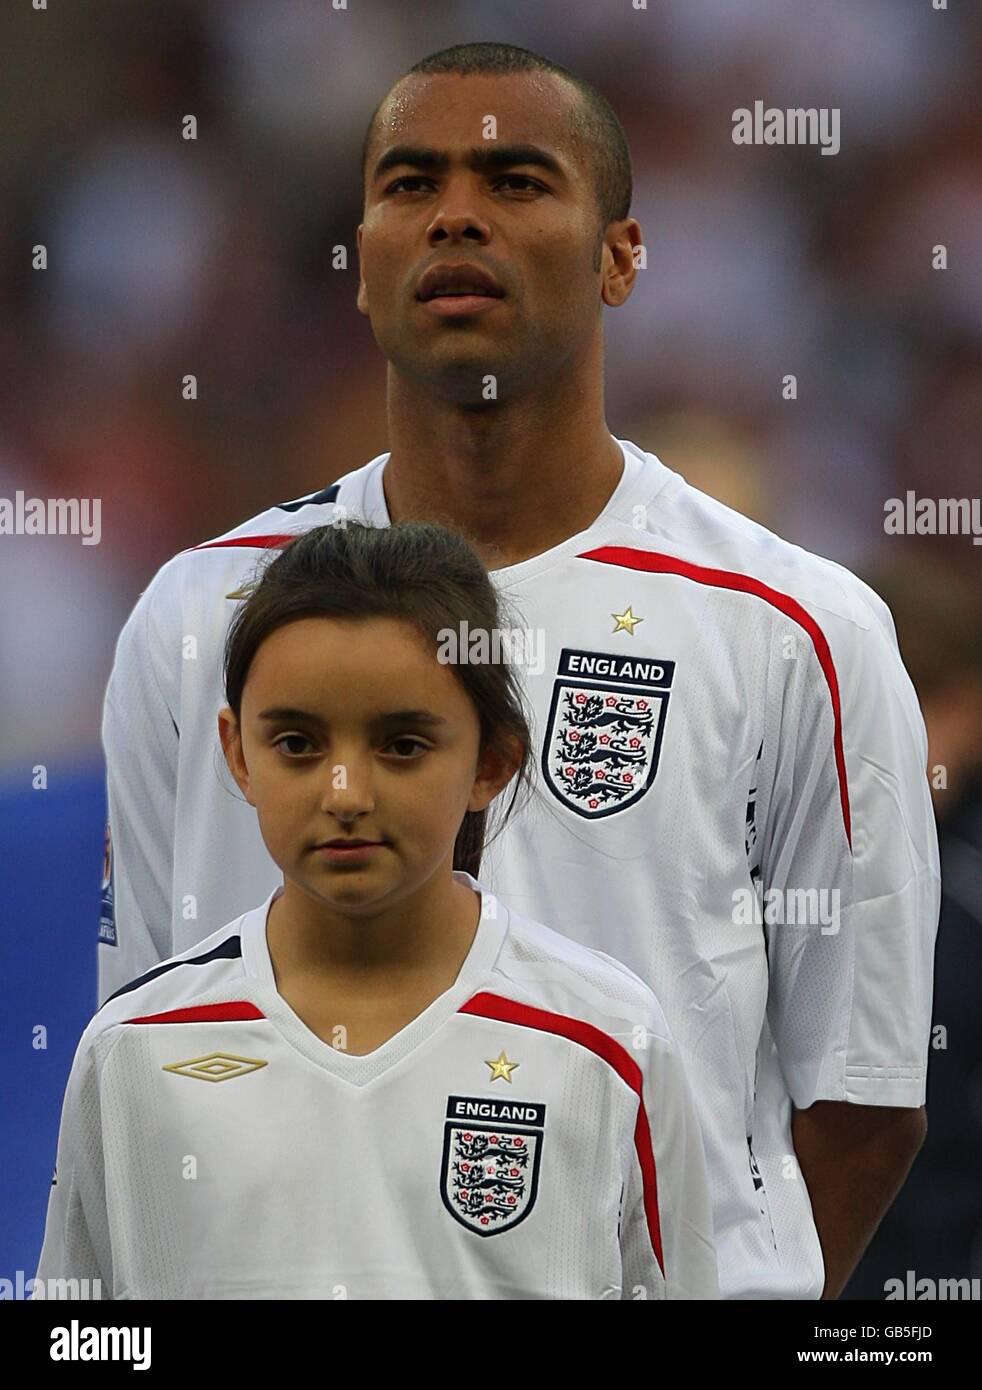 Soccer - FIFA World Cup 2010 - Qualifying Round - Group Six - England v Kazakhstan - Wembley Stadium. England's Ashley Cole with a young mascot. Stock Photo